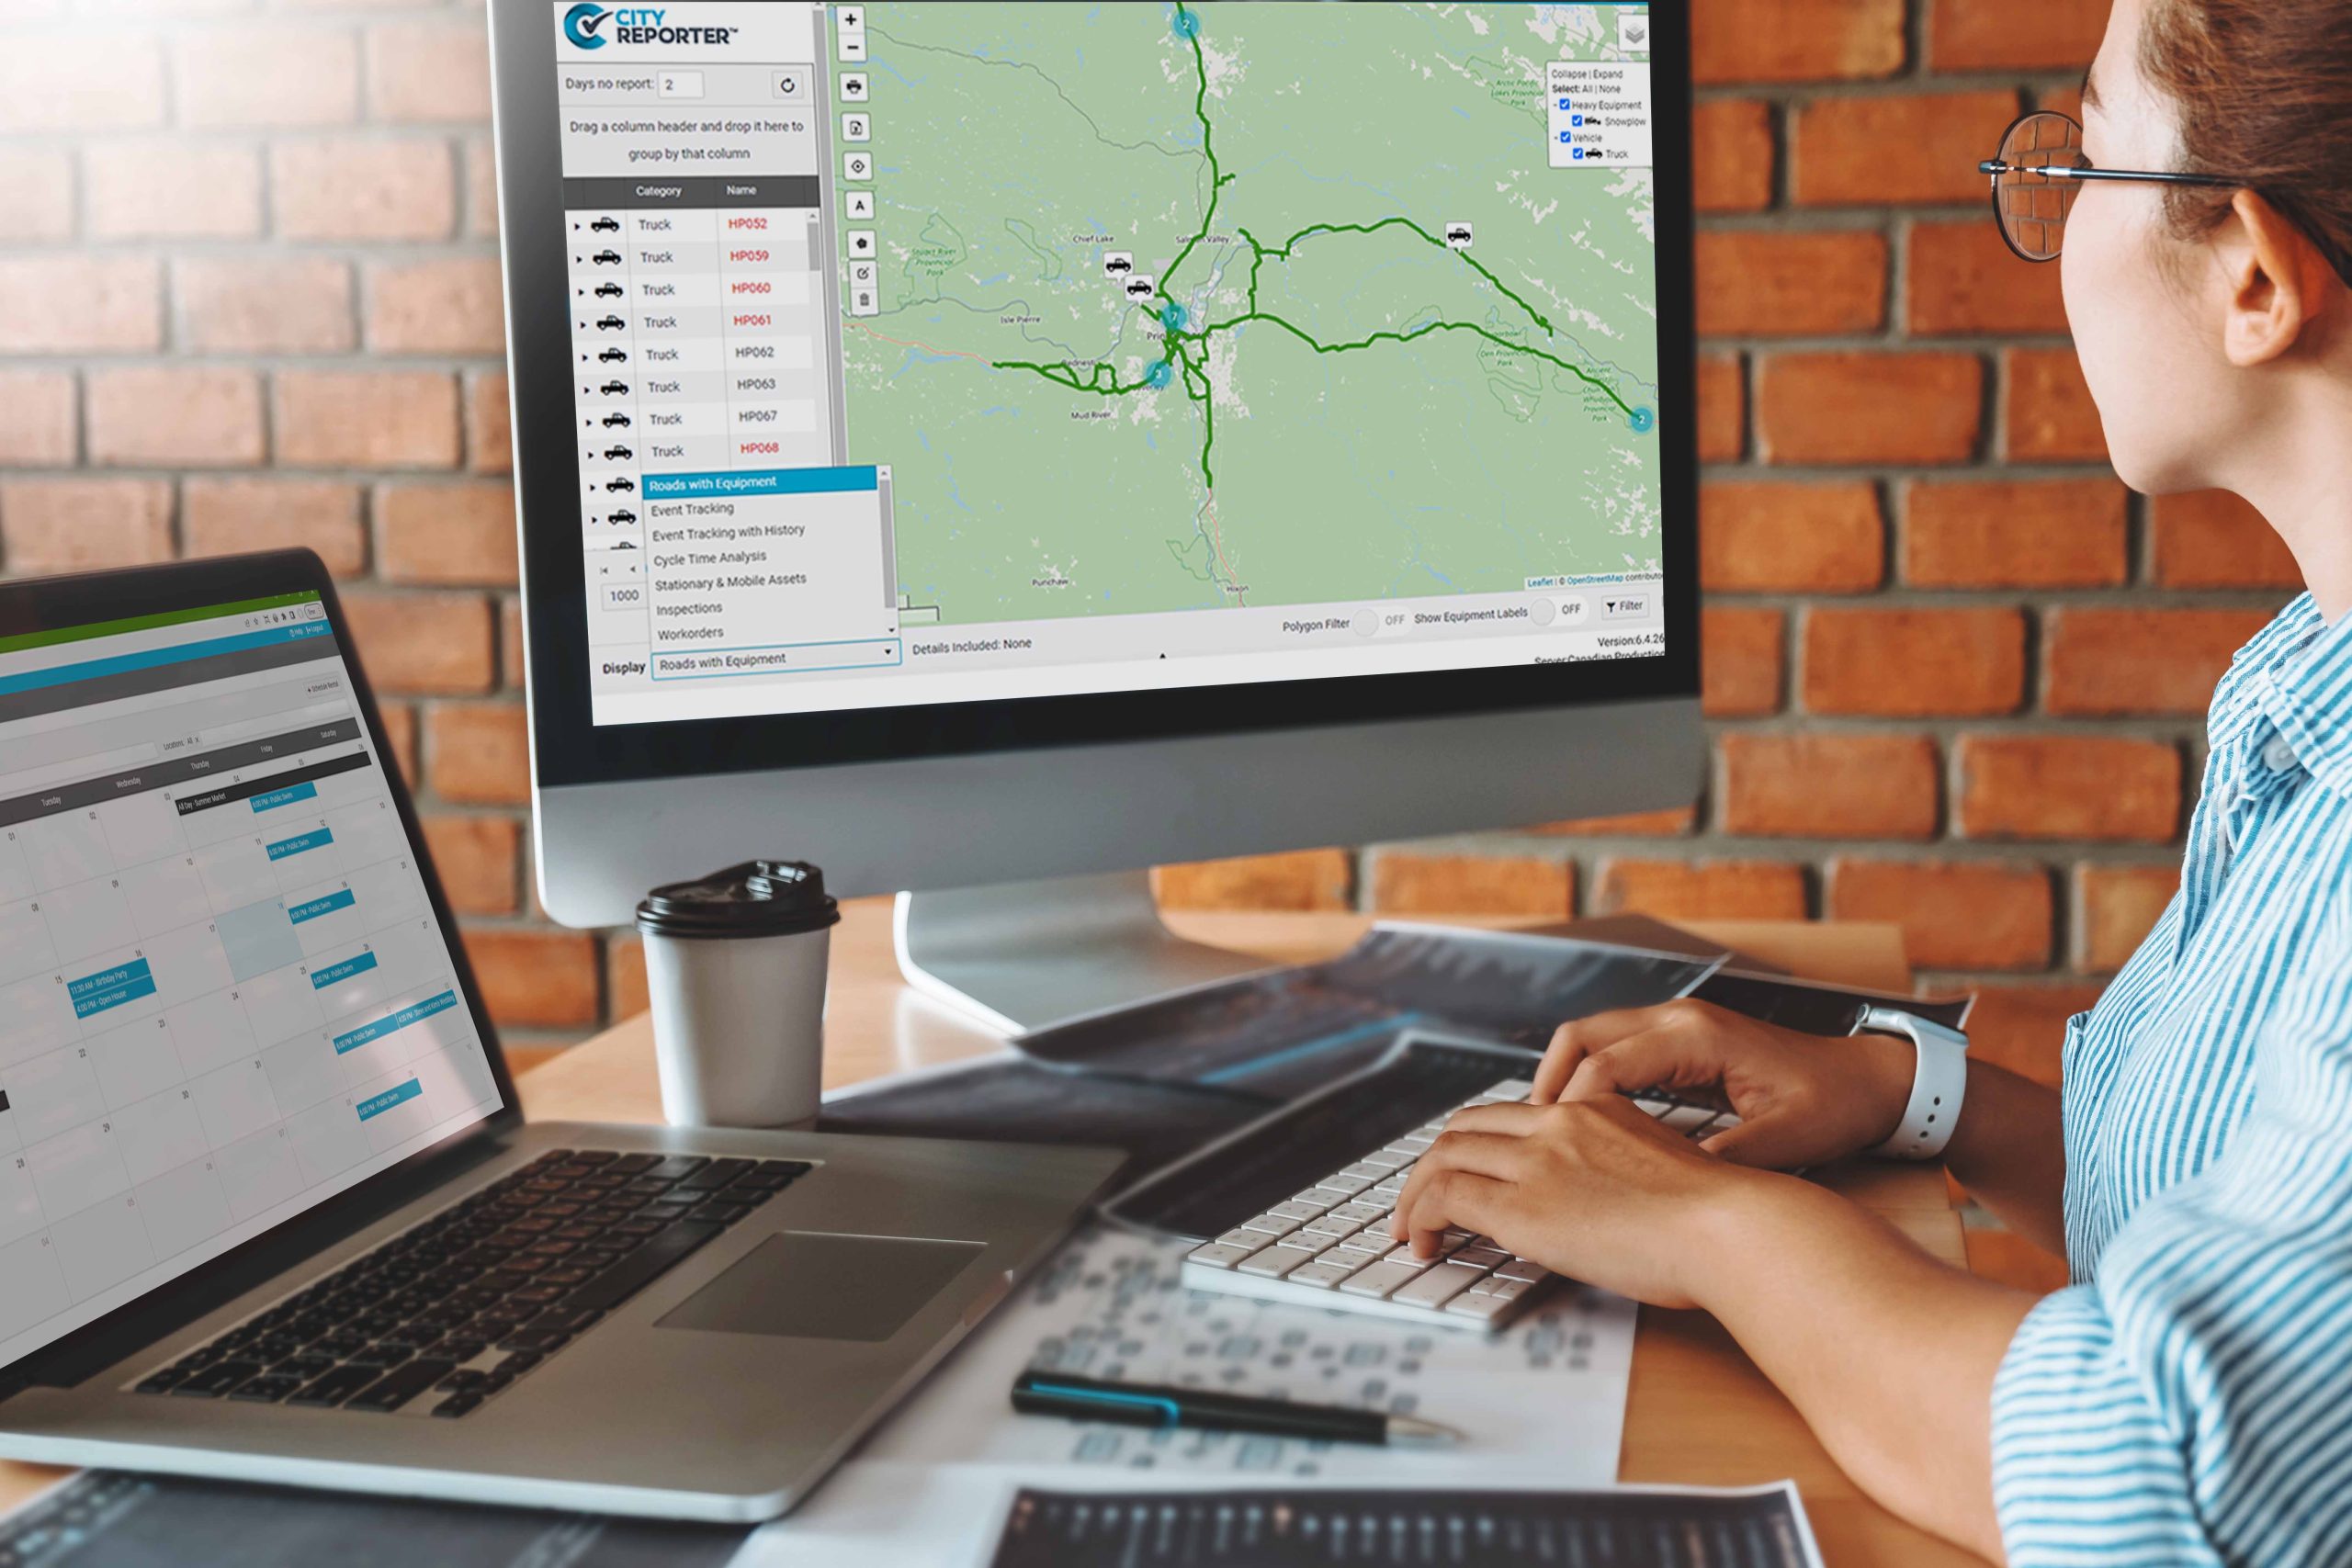 A city administrator using CityReporters live vehicle tracking and scheduling software